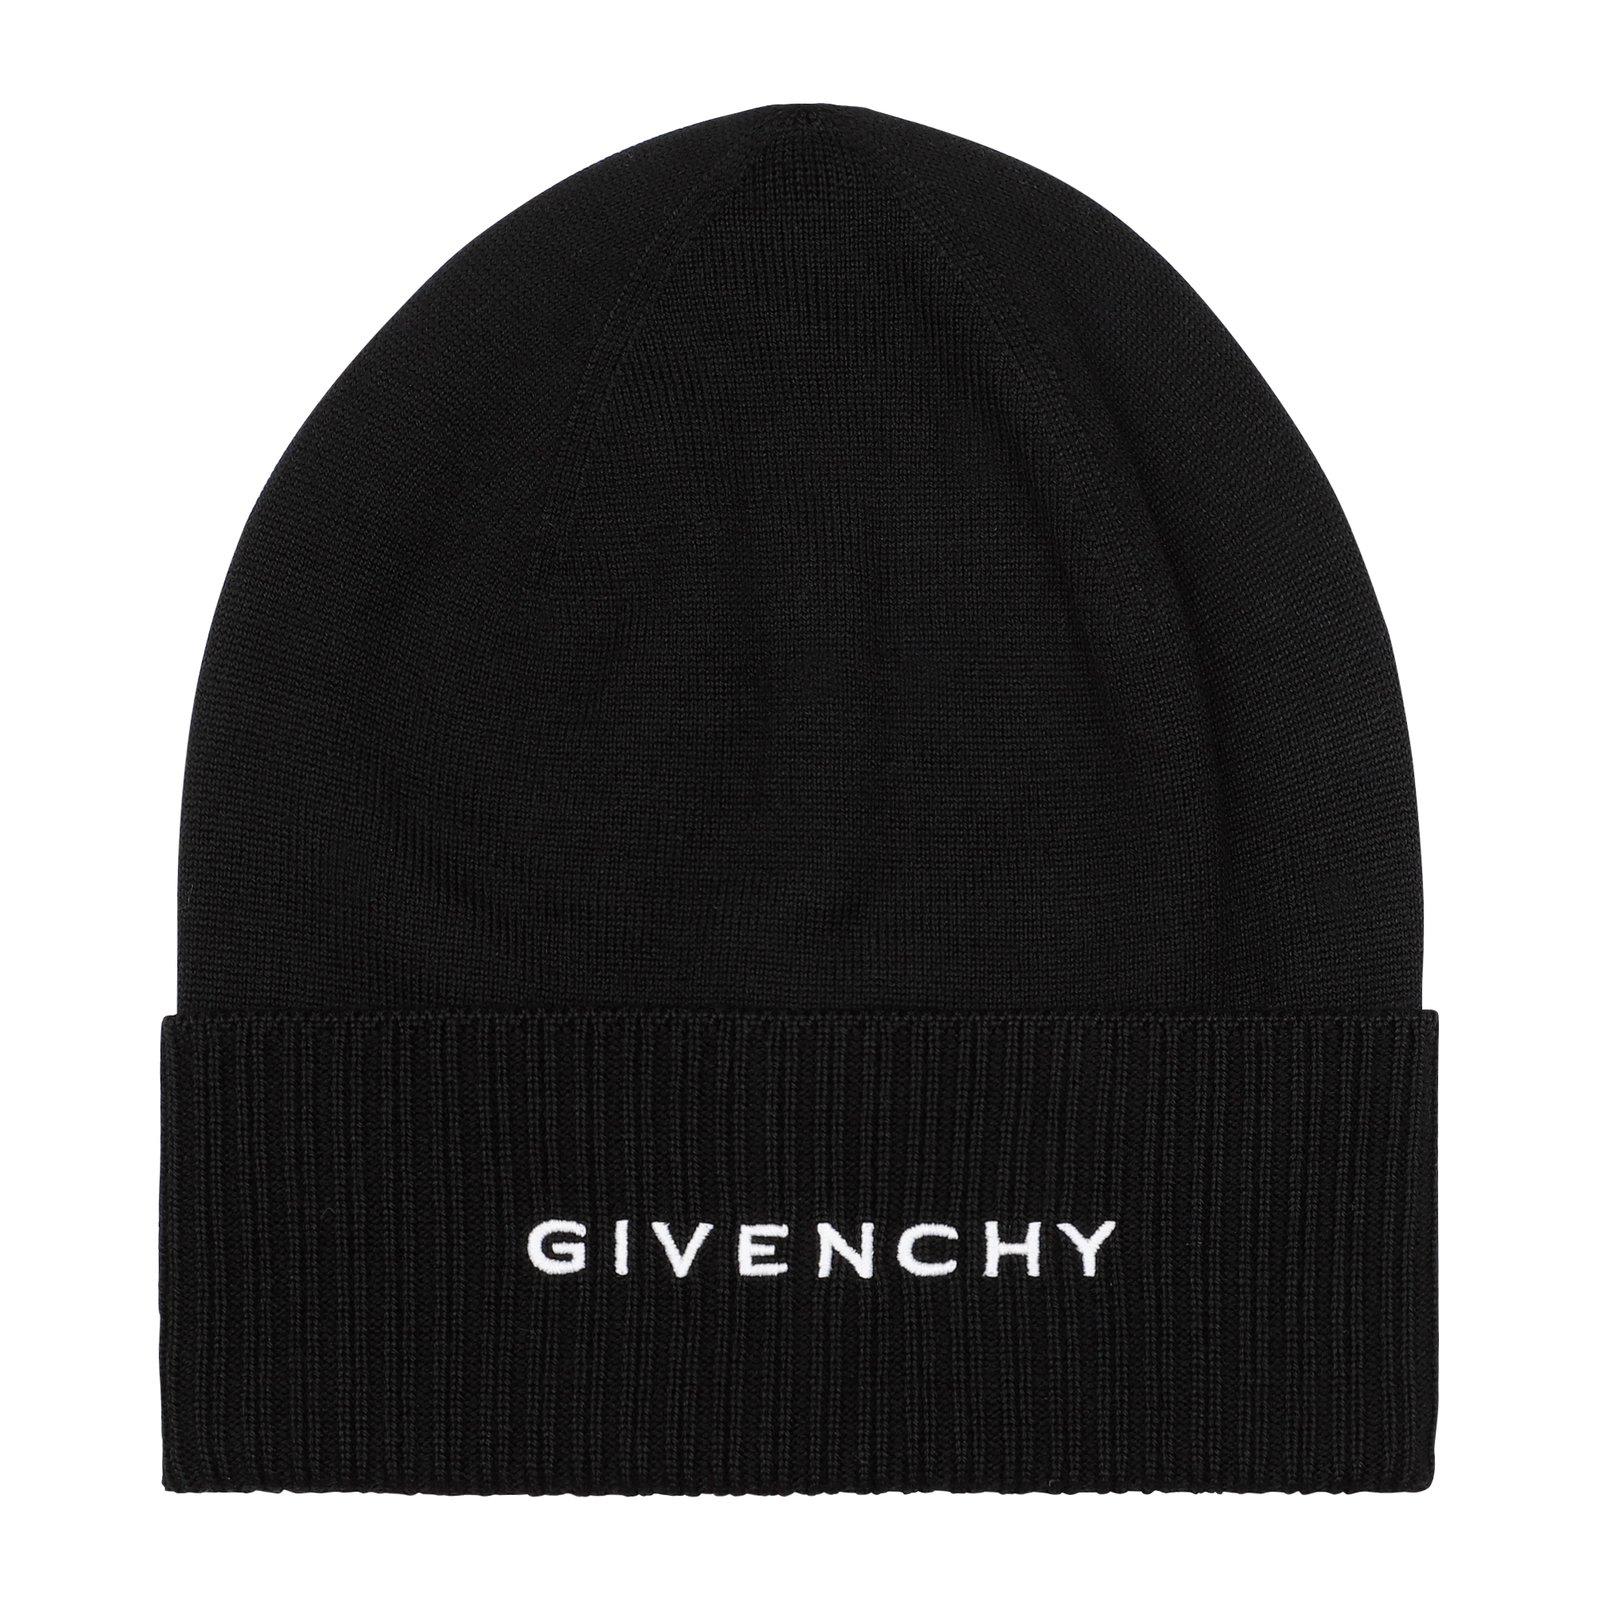 GIVENCHY LOGO EMBROIDERED BEANIE